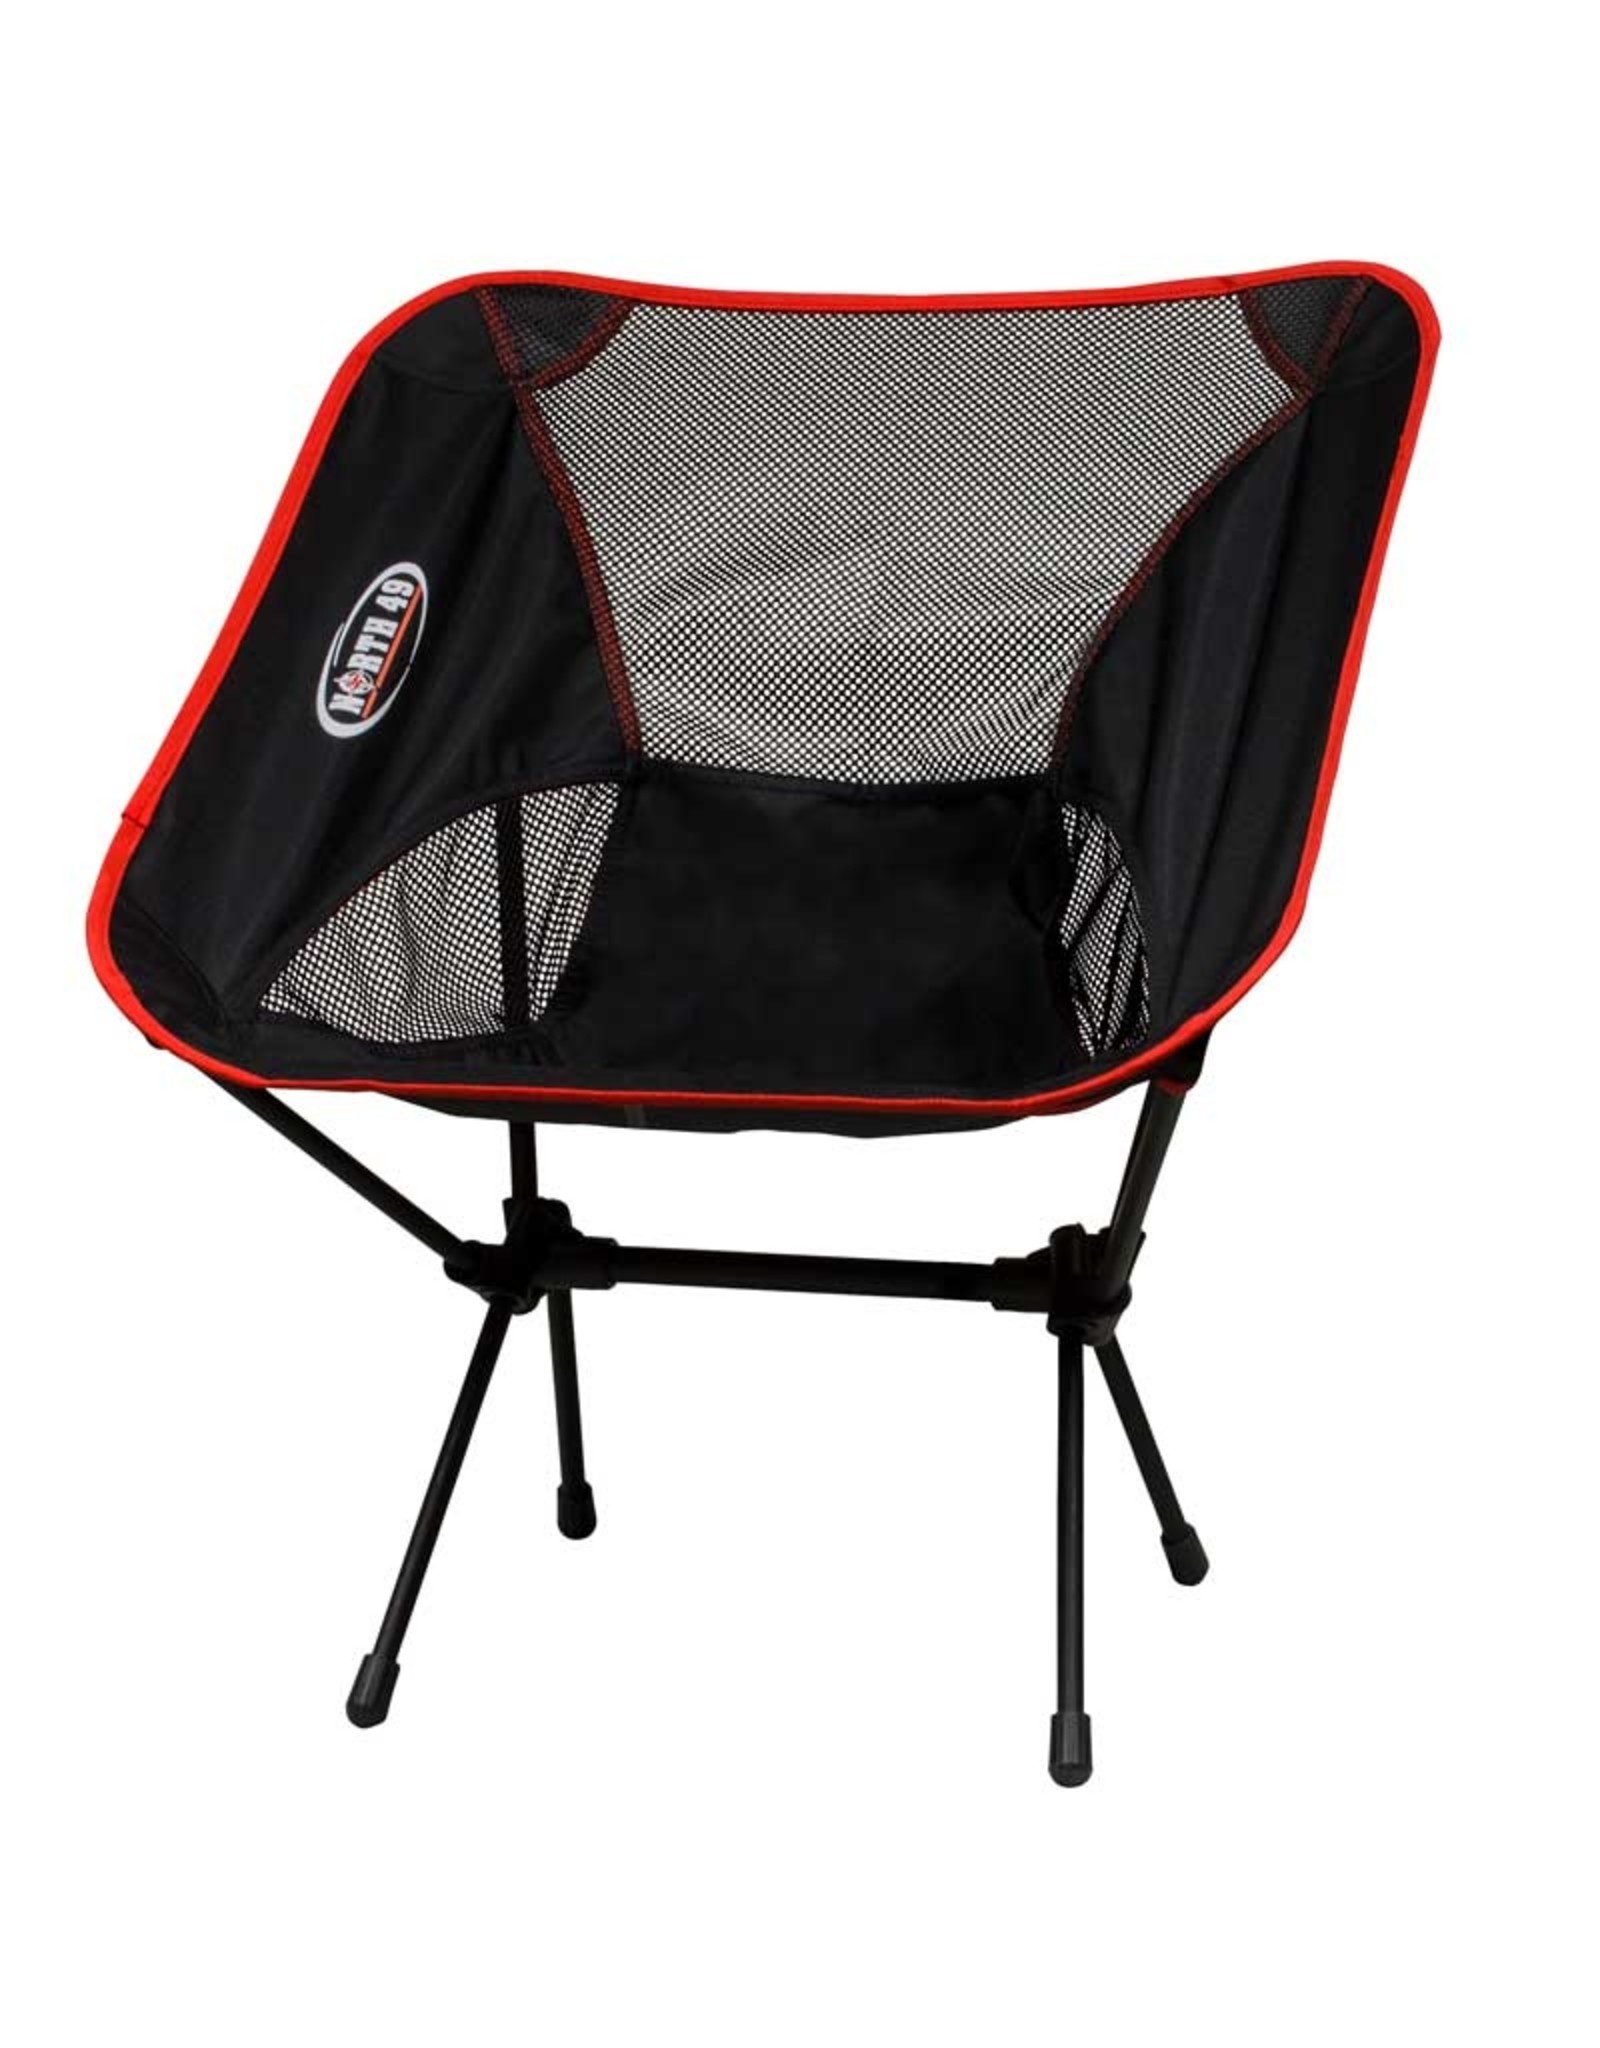 NORTH 49 POD CHAIR RED/BLACK